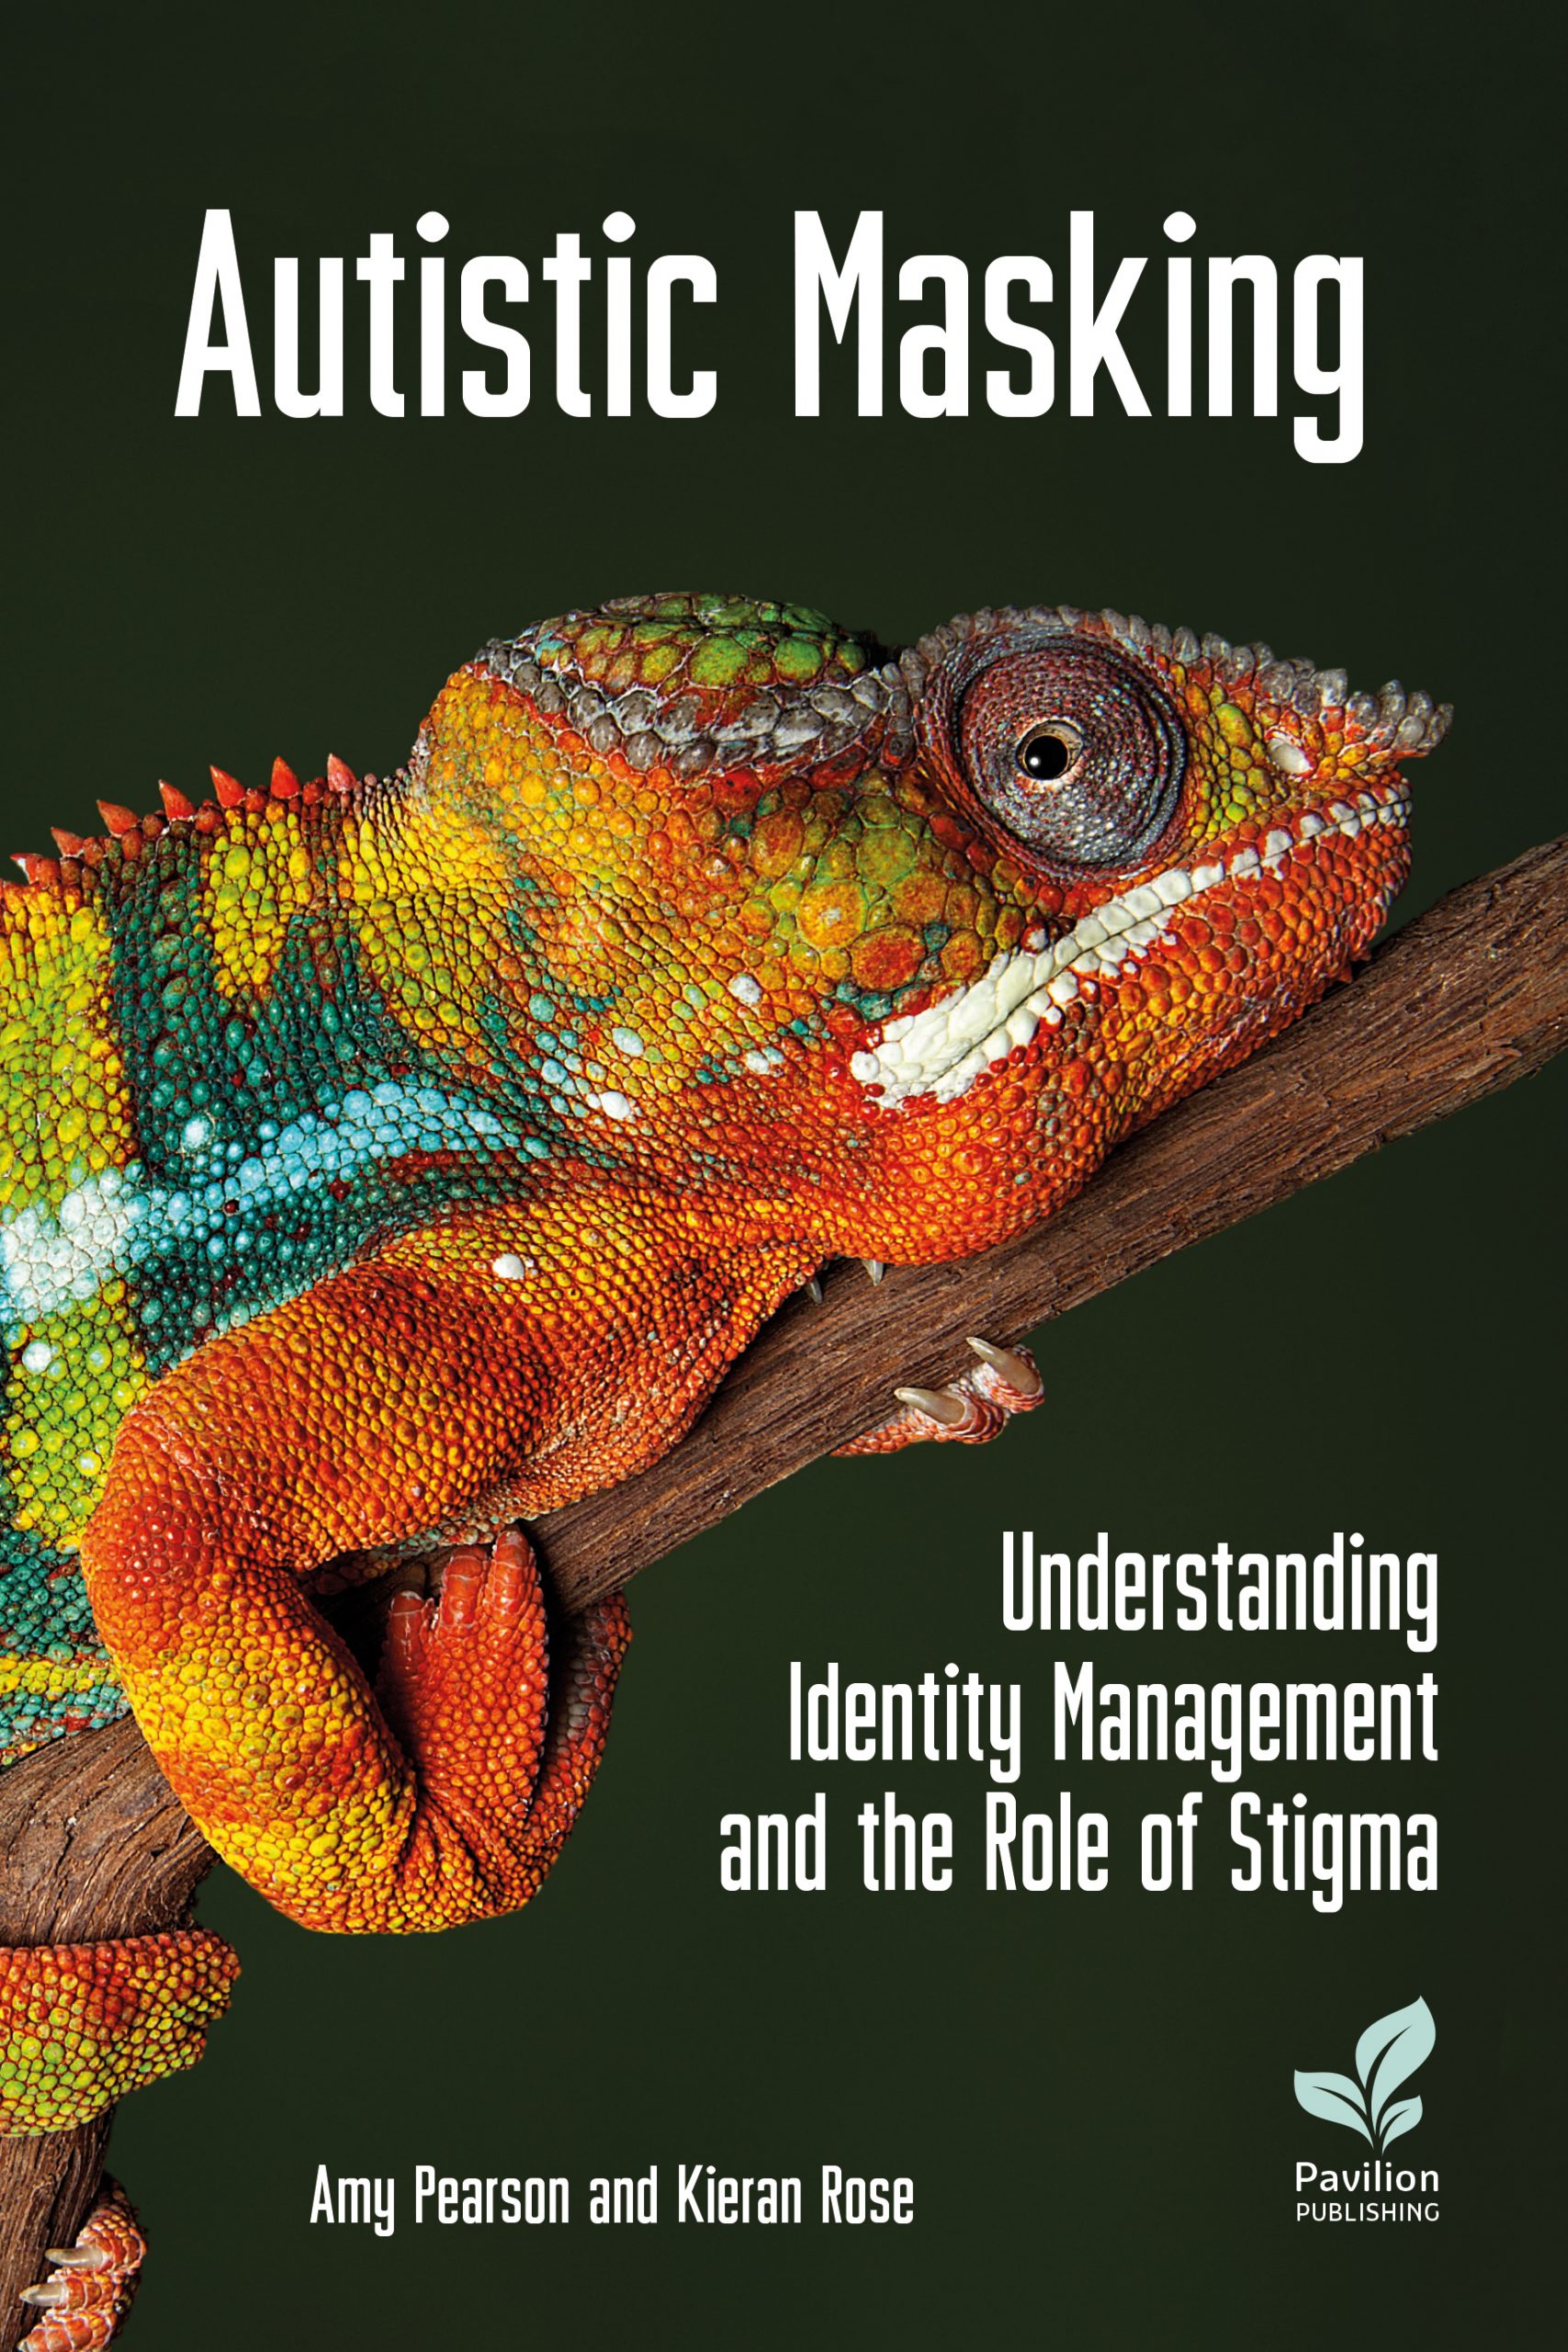 Autistic Masking: Understanding Identity Management and the Role of Stigma